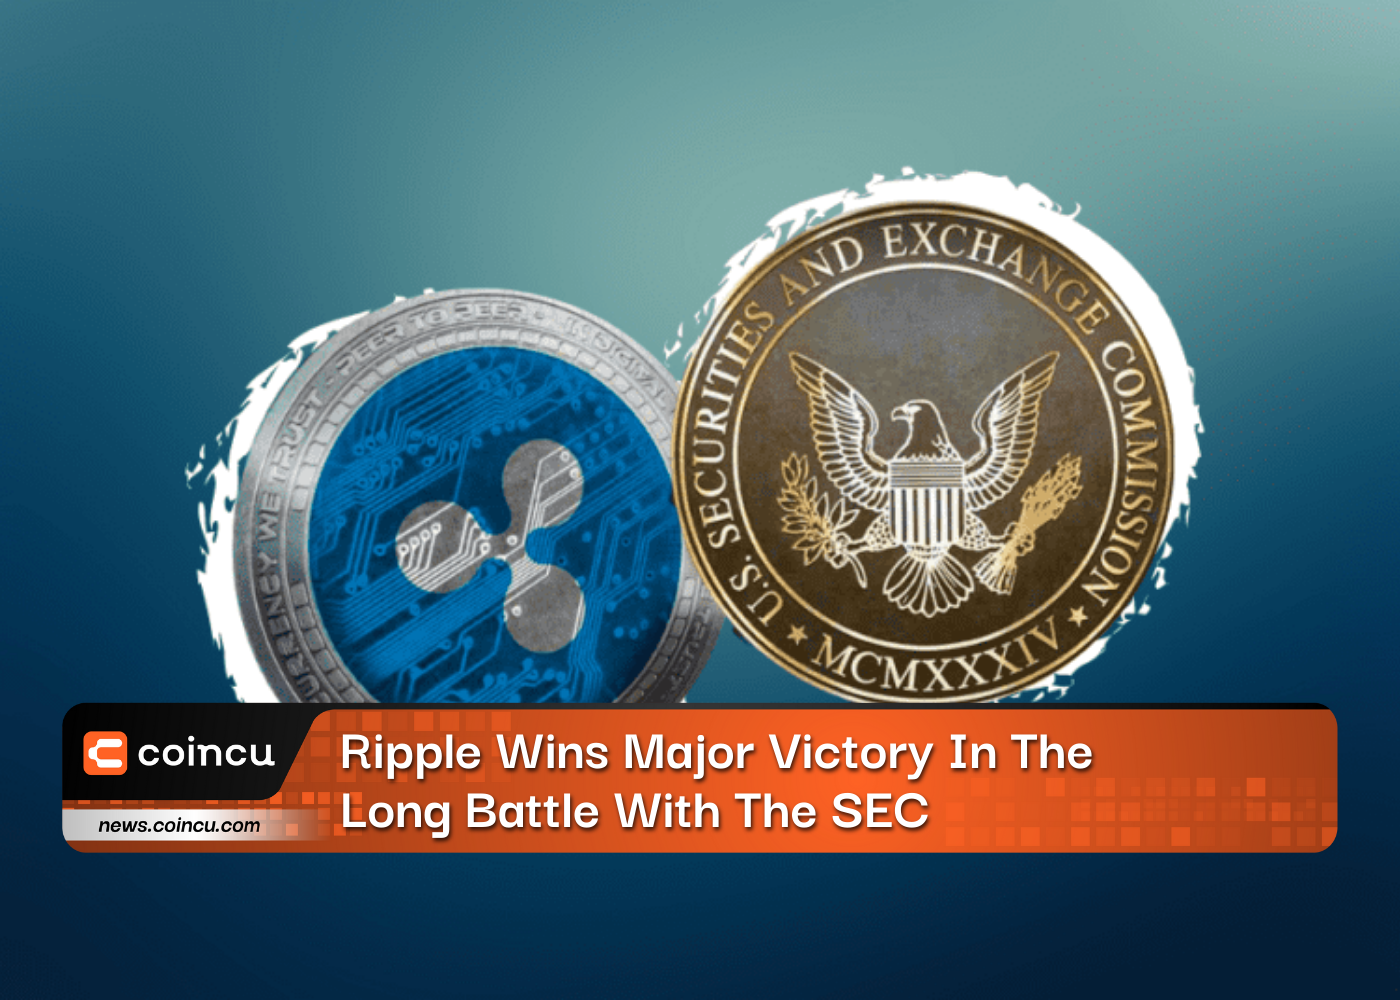 Ripple Wins Major Victory In The Long Battle With The SEC